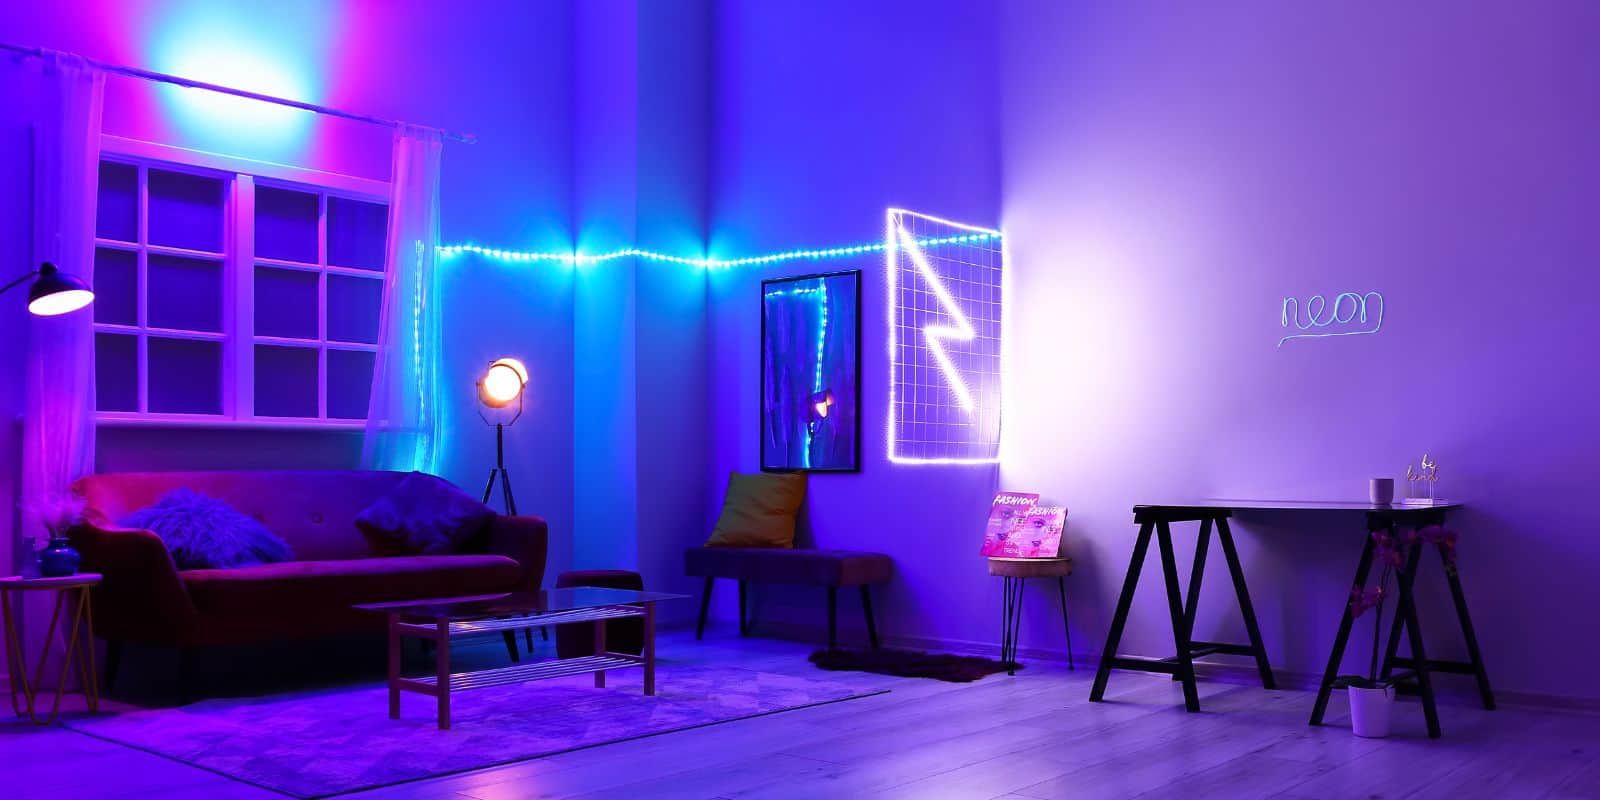 Neon Decor Ideas for Your Home